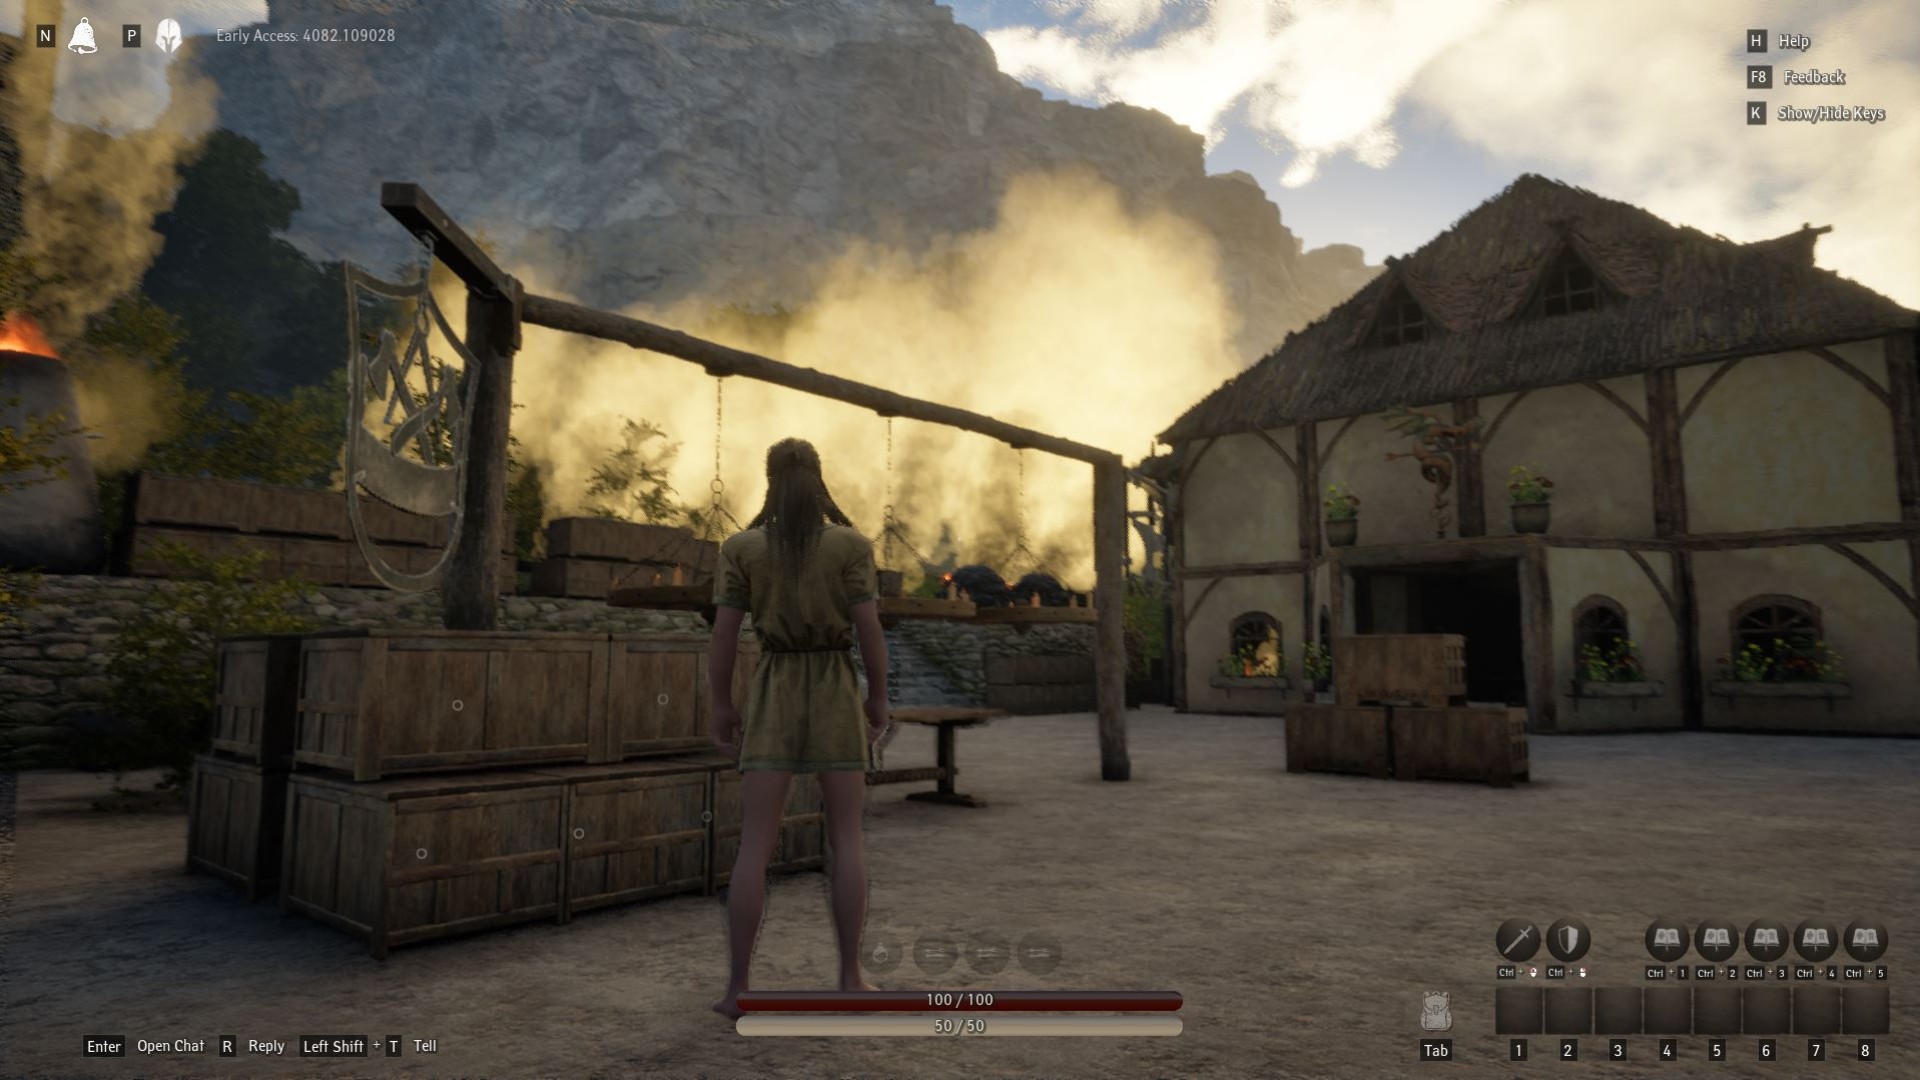 Pax Dei impressions: The player character stands in the courtyard of a player-created blacksmith, as smoke billows in the background.